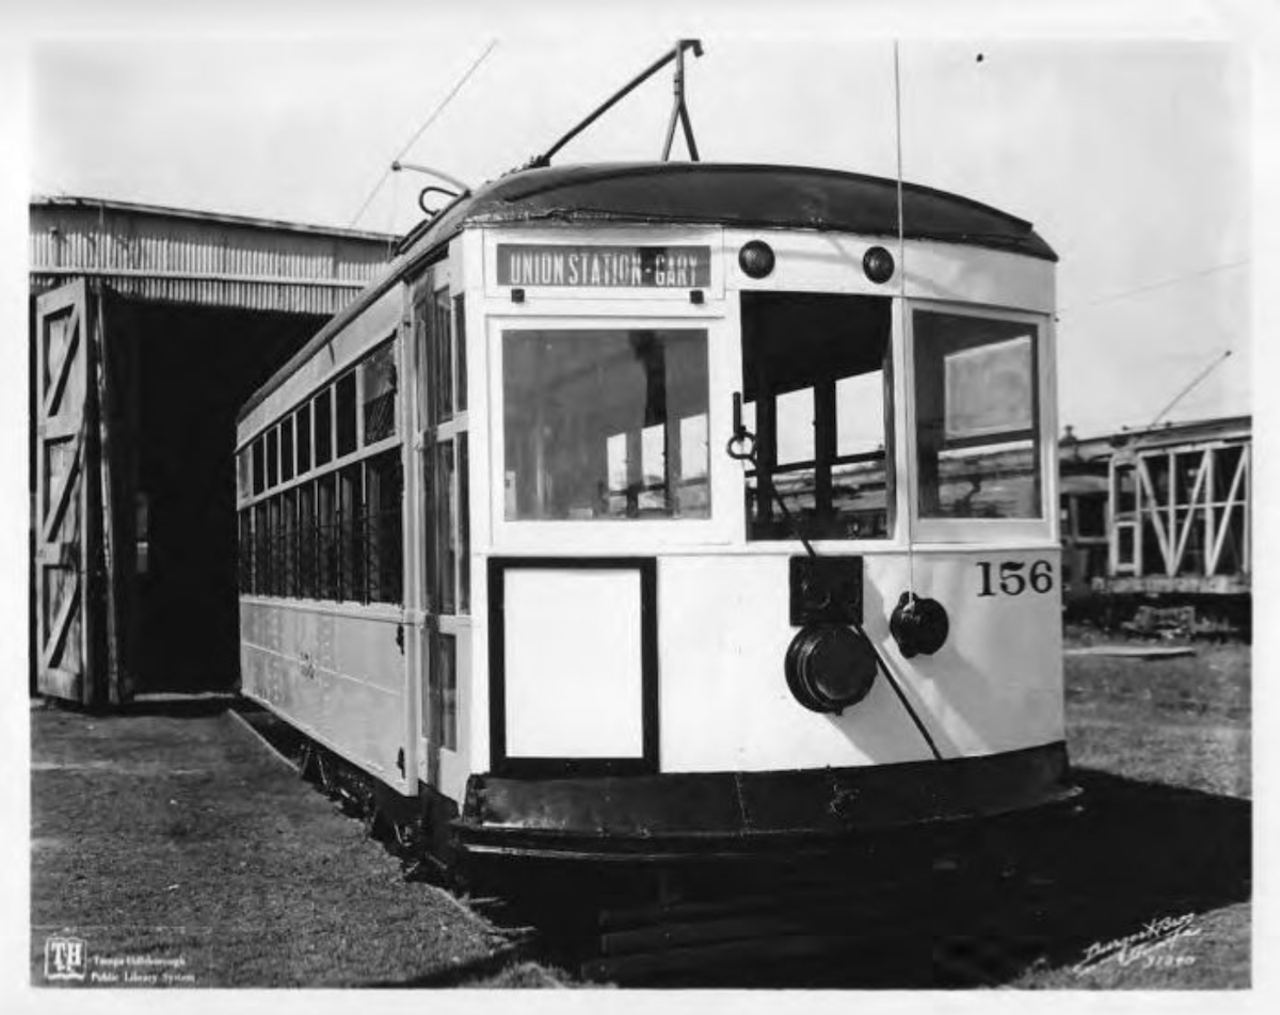 Streetcar No. 156, Union Station-Gary route, shown outside of trolley barn : Tampa, Fla.
Photo by Burgert Brothers via Tampa-Hillsborough County Public Library System